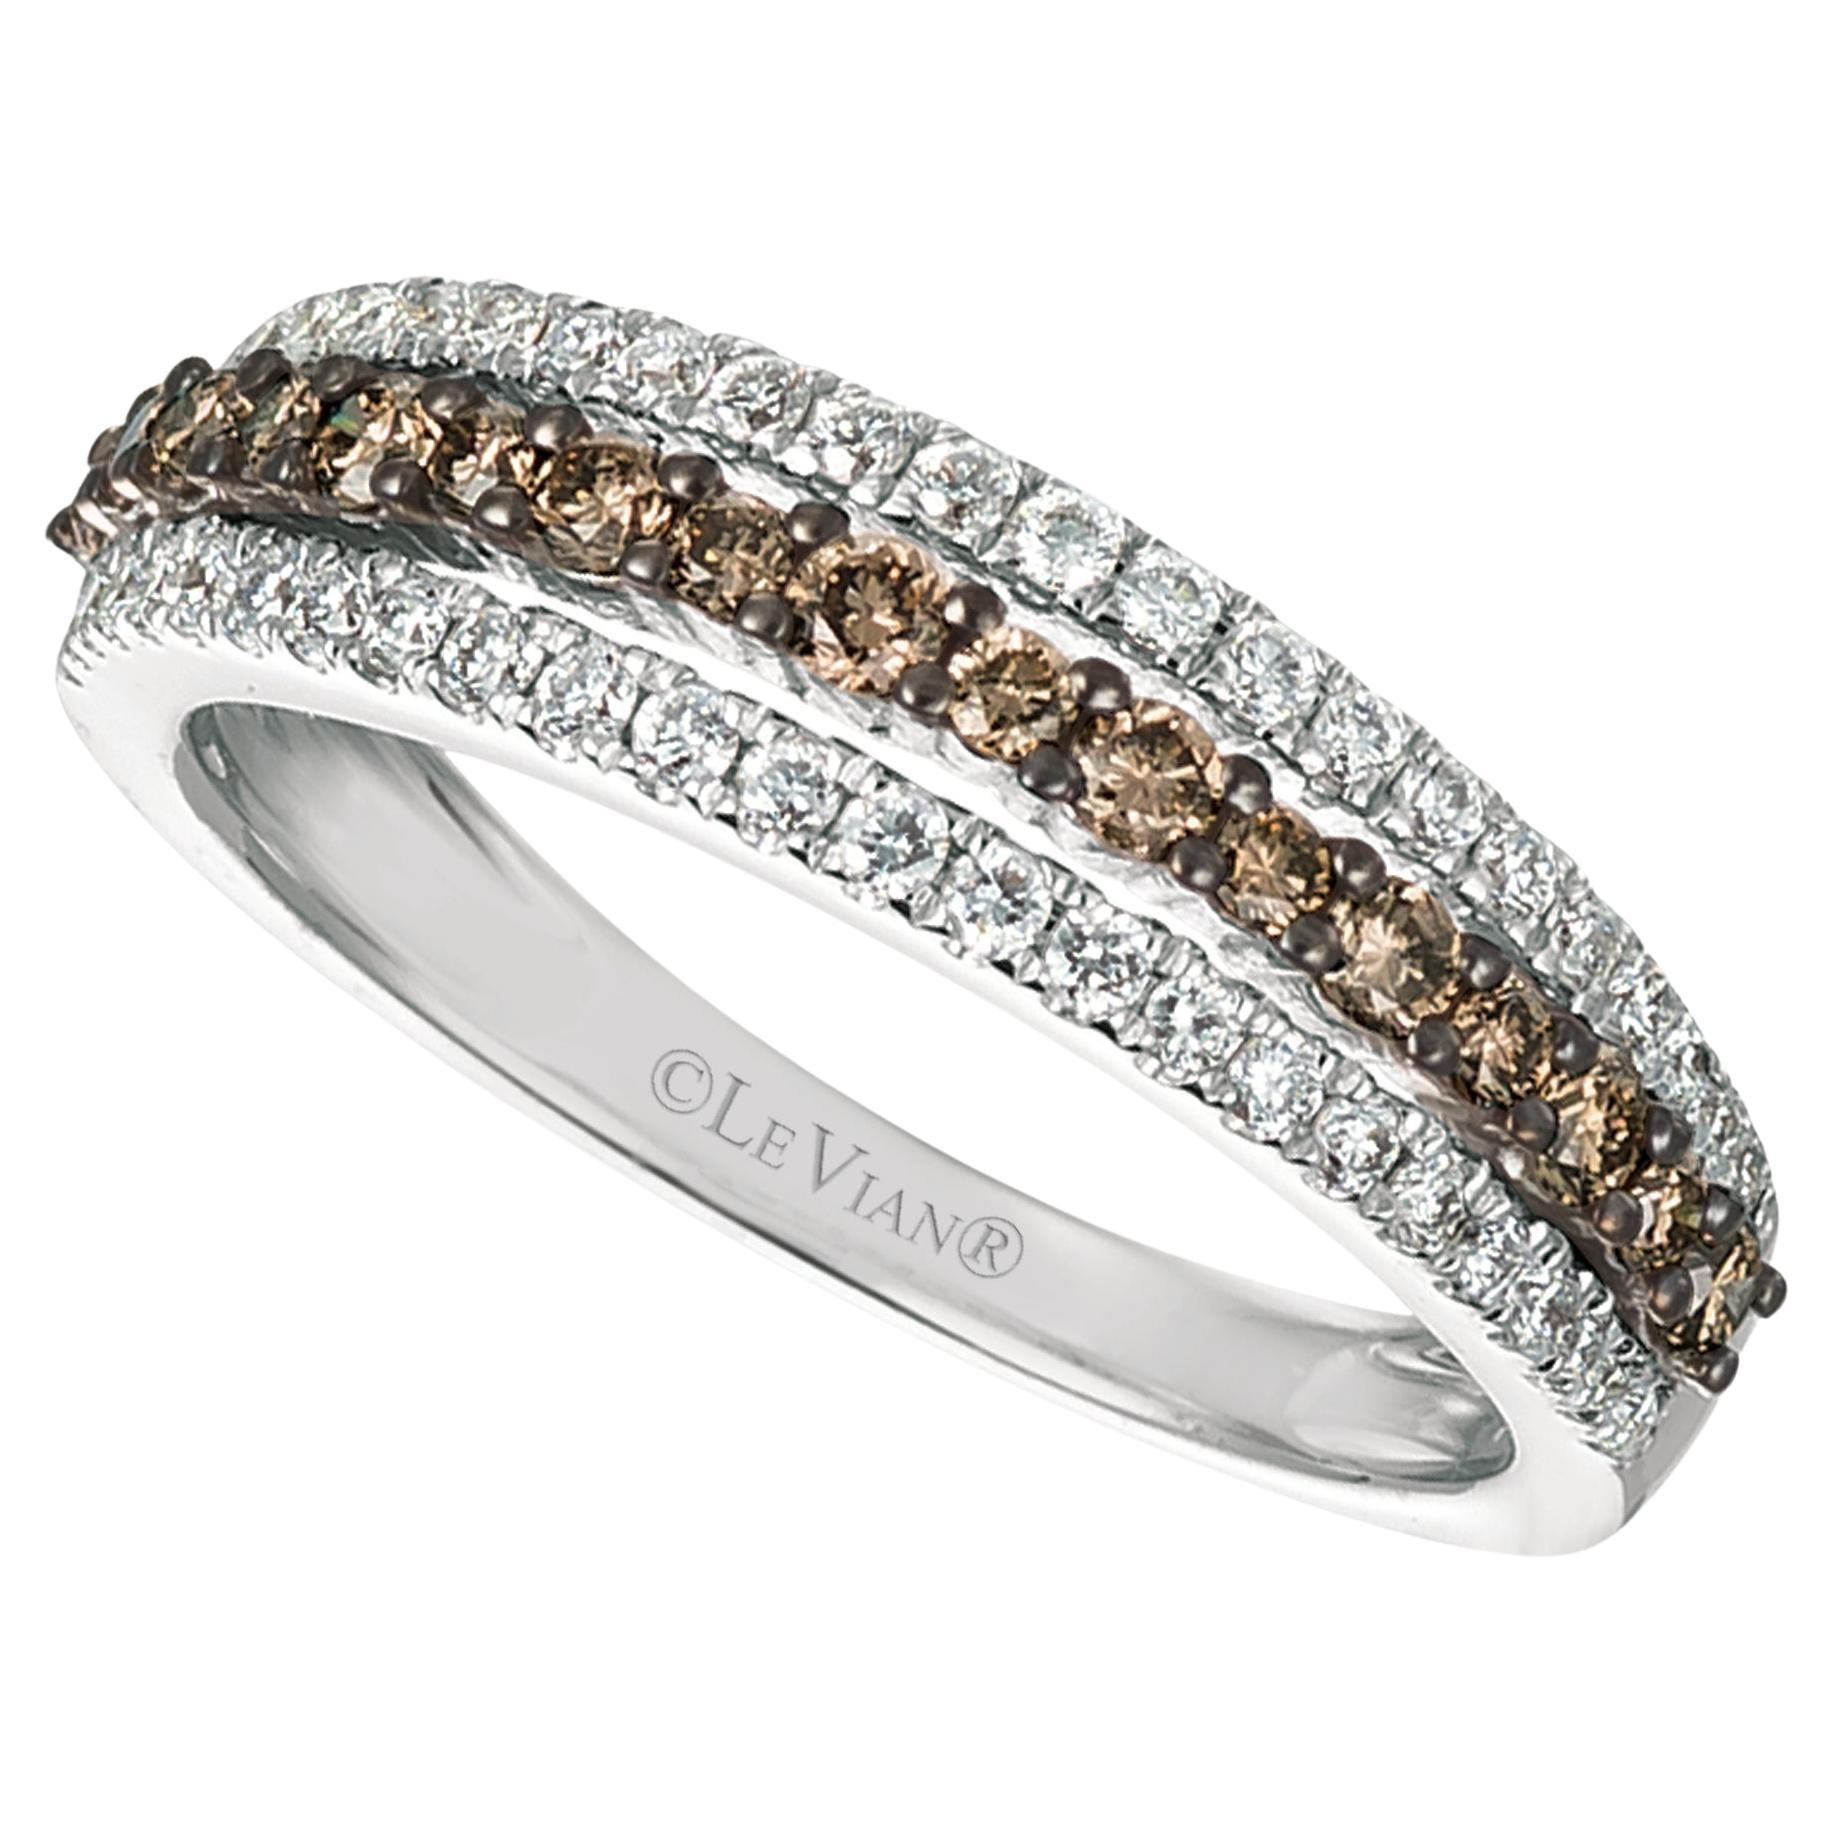 Levian 14k White Gold 2 3 Cttw Chocolate and White Diamond Ring